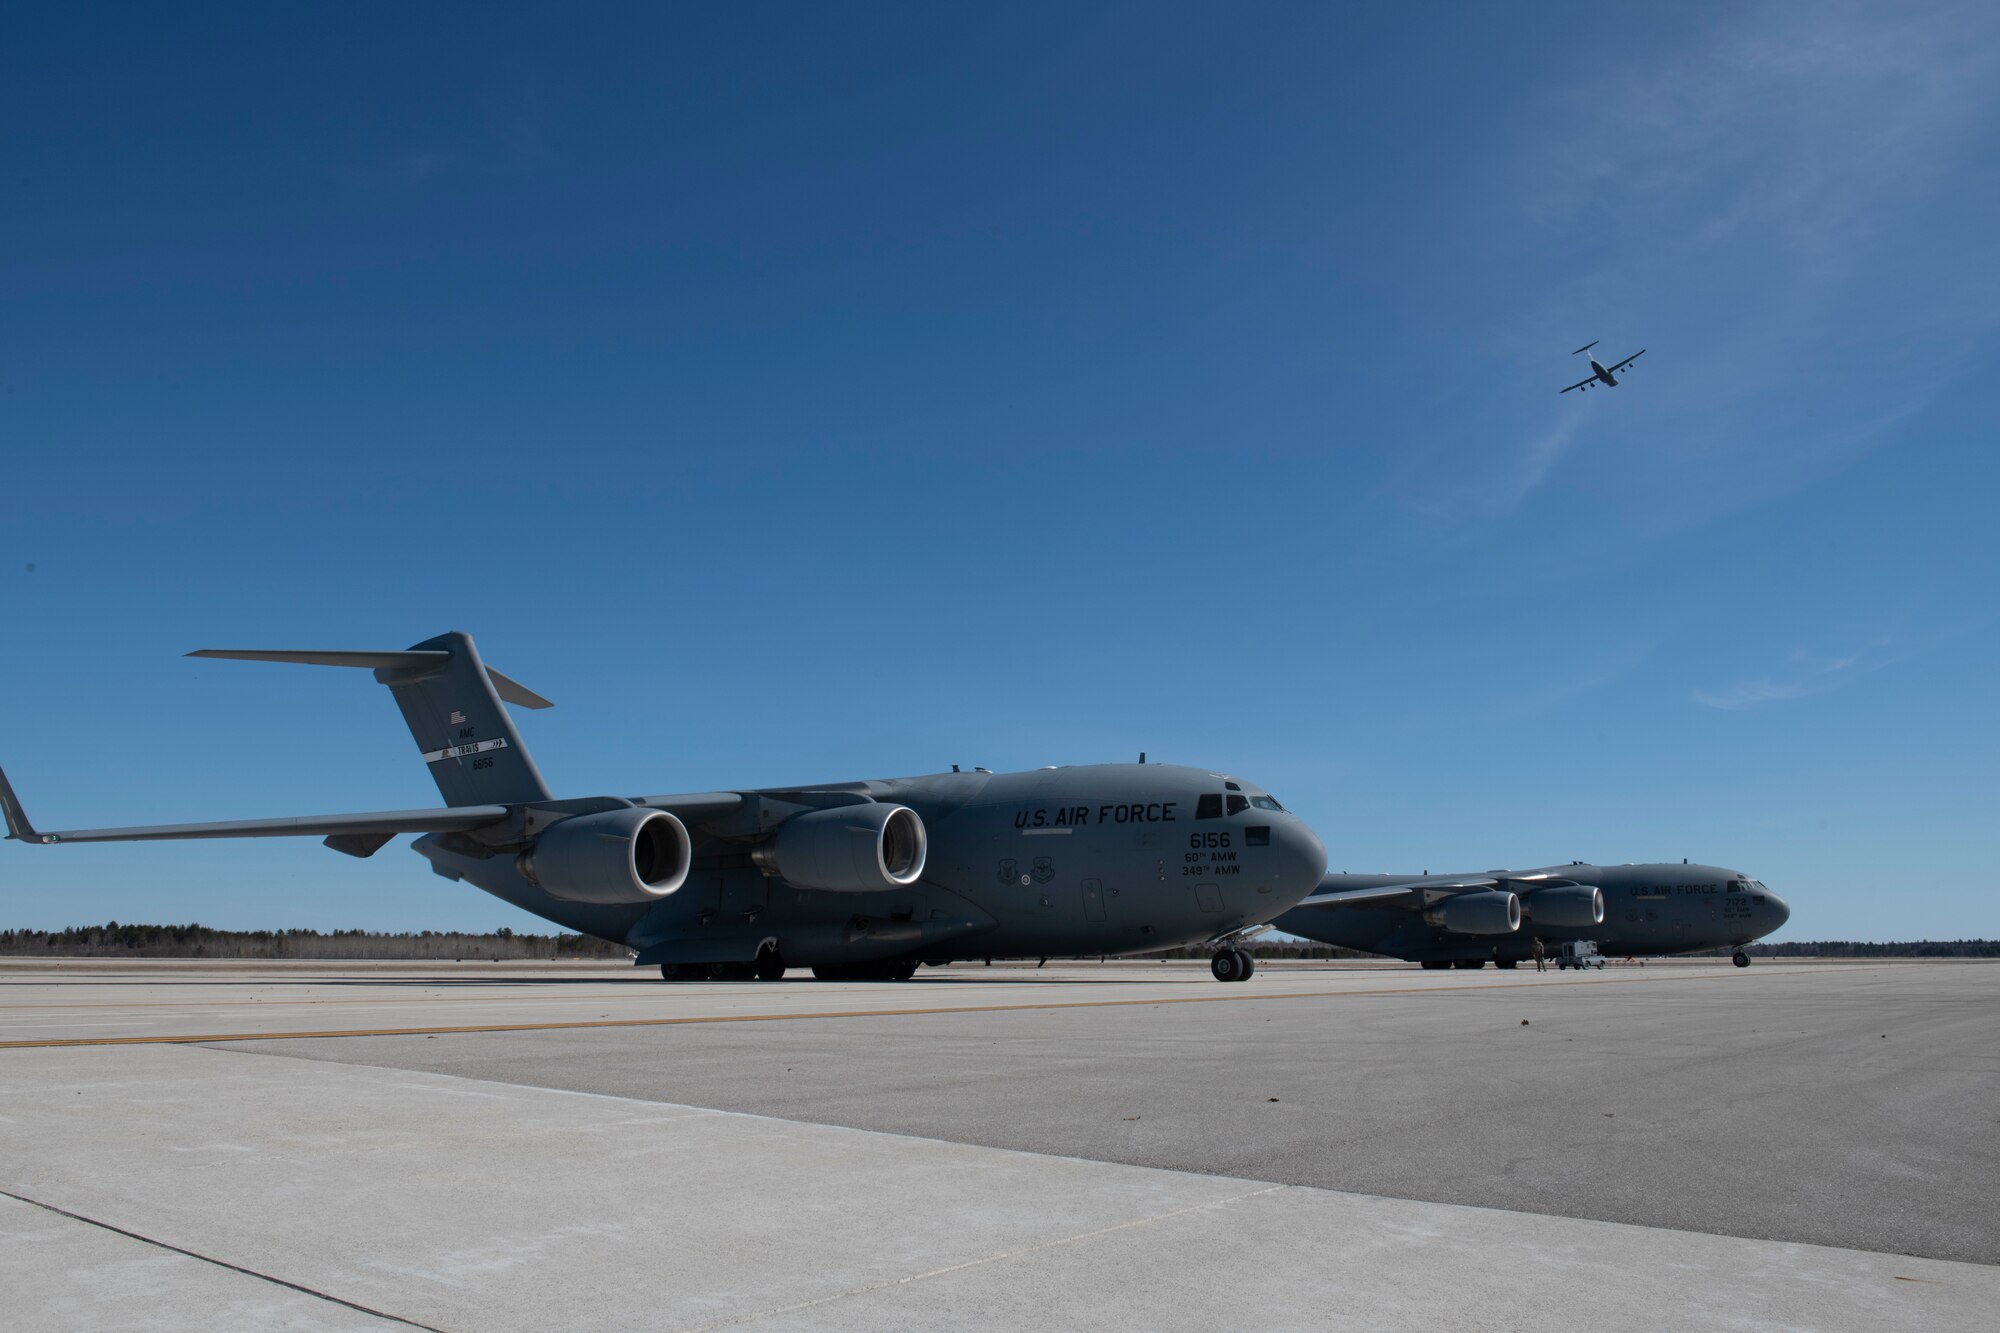 U.S. Air Force C-17 Globemaster III aircraft from Travis Air Force Base, California, are parked on the flight line at the Alpena Combat Readiness Training Center, Alpena, Michigan, April 10, 2022, while a Travis C-5M Super Galaxy flies above.